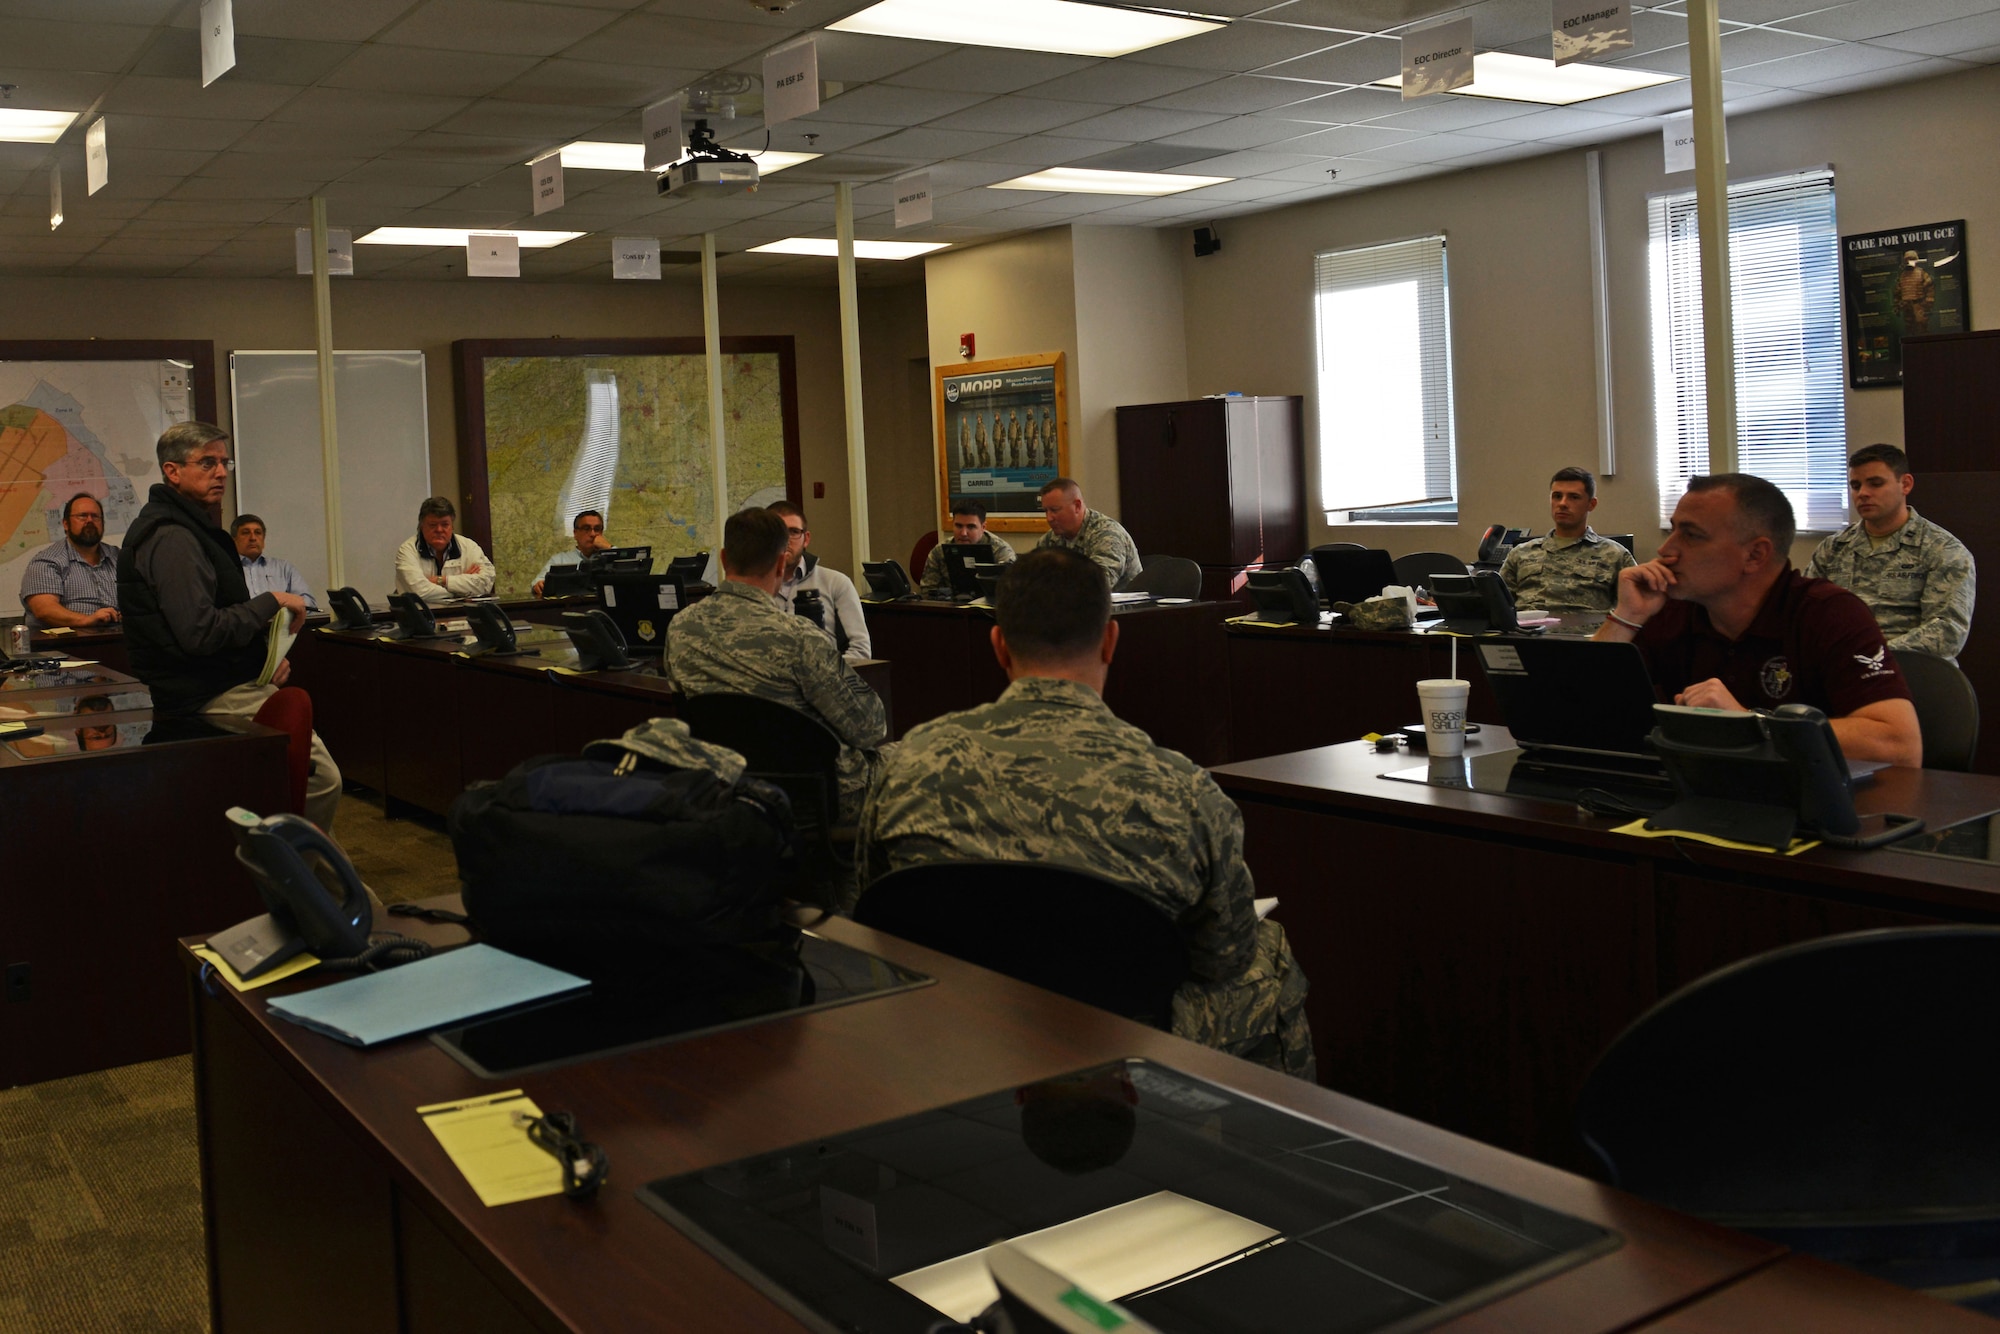 Teams from across the Air Force discuss logistics during an integration meeting at Shaw Air Force Base, S.C., Feb. 15, 2017. The surveyors visited Shaw after it was chosen as one of eight potential candidates for a Battlefield Airman schoolhouse. (U.S. Air Force photo by Airman 1st Class Destinee Sweeney)